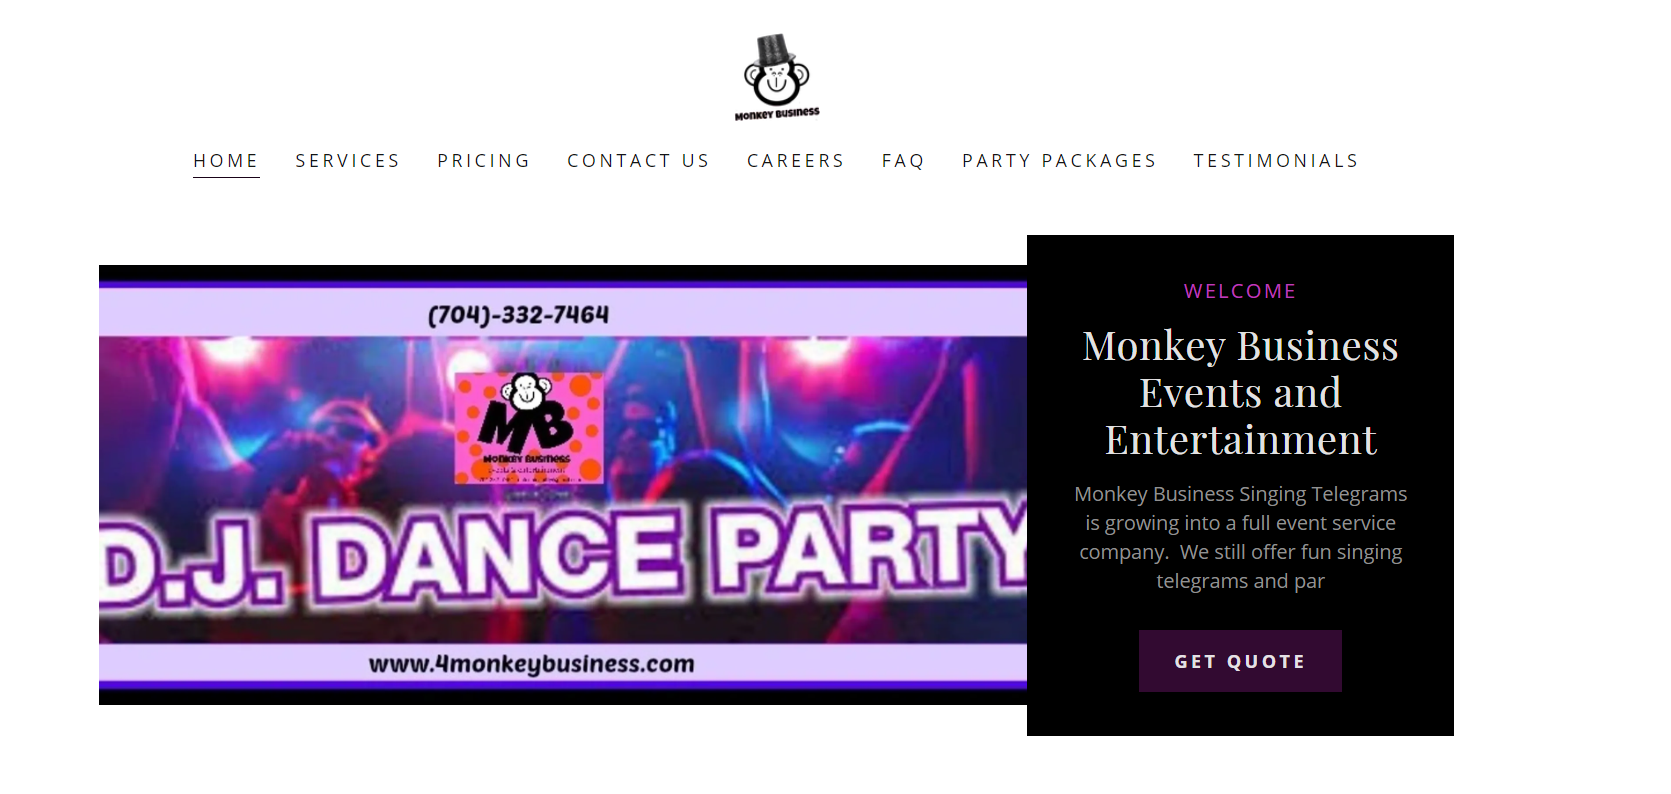 Monkey Business Events and Entertainment